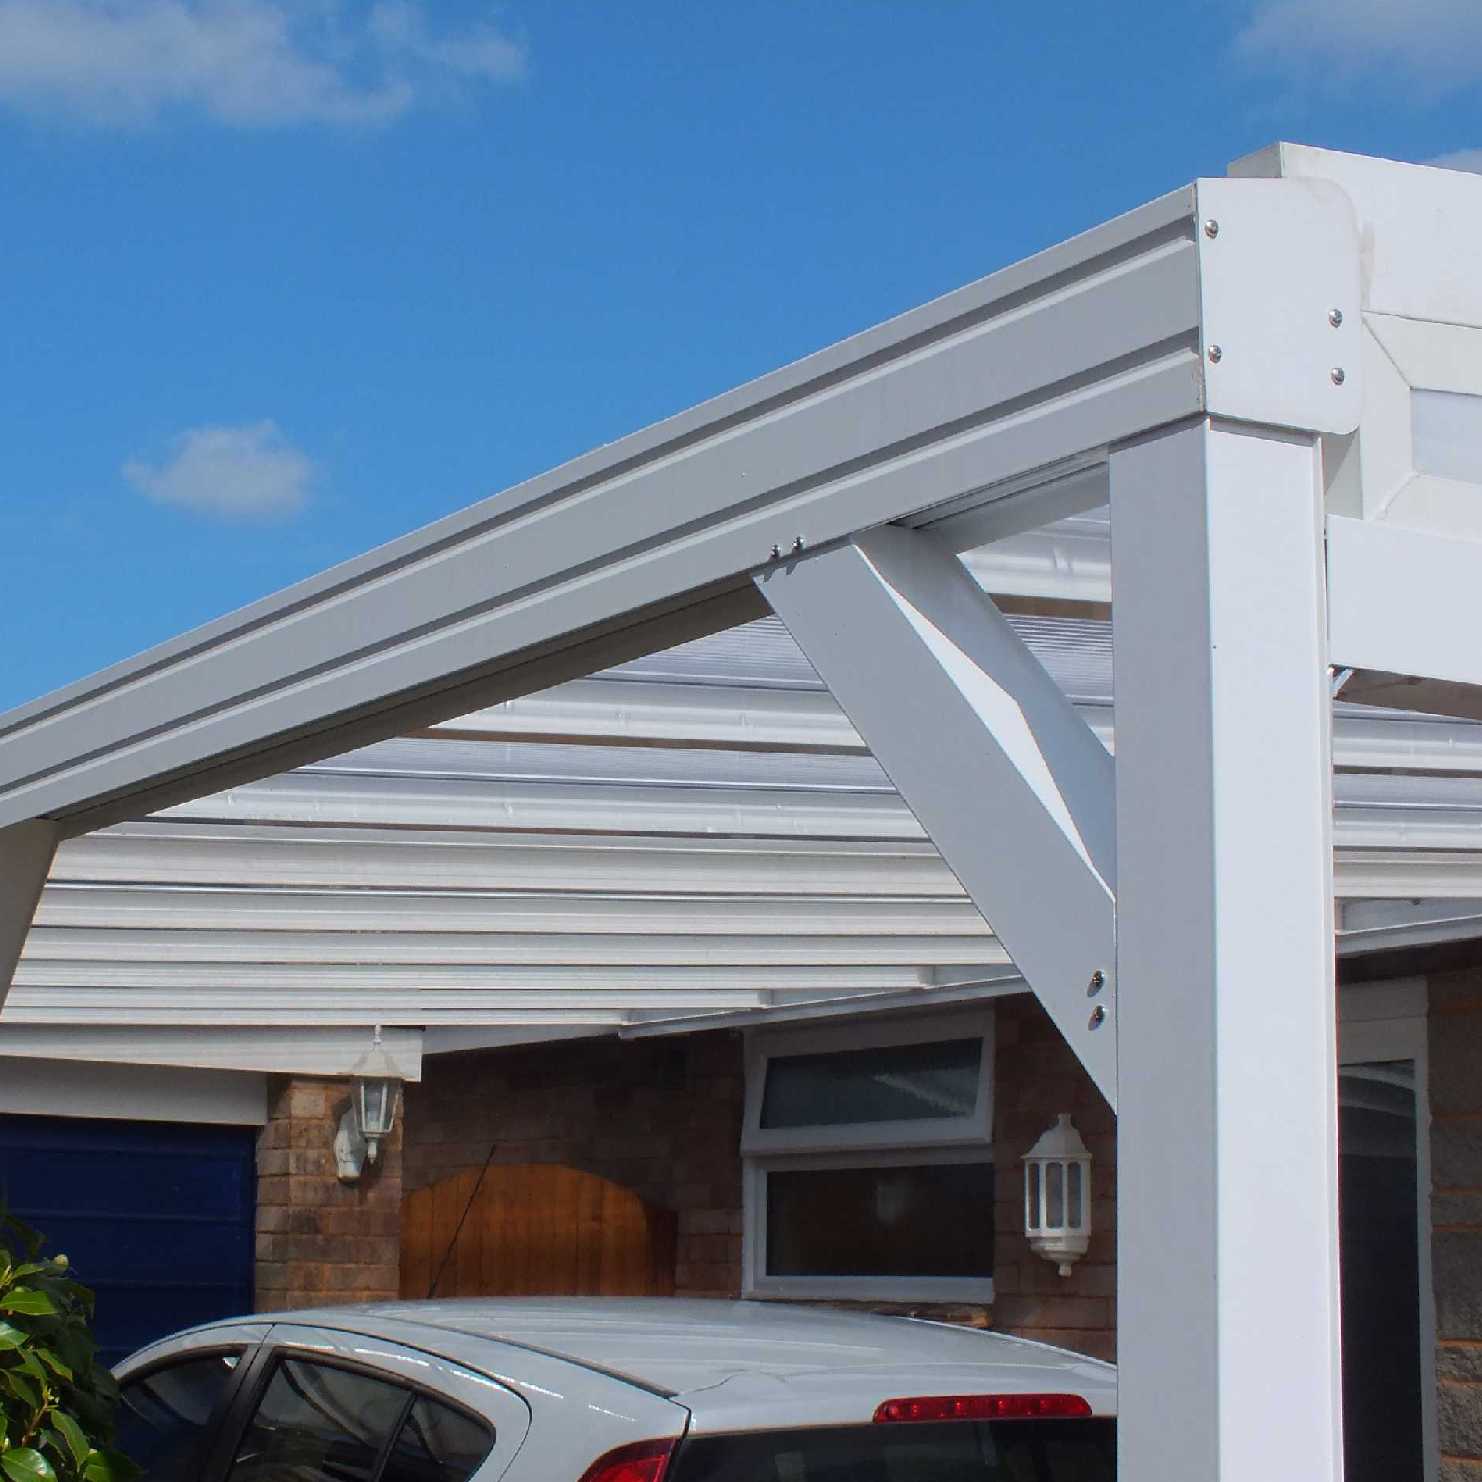 Buy Omega Smart Lean-To Canopy, White with 16mm Polycarbonate Glazing - 10.6m (W) x 1.5m (P), (5) Supporting Posts online today